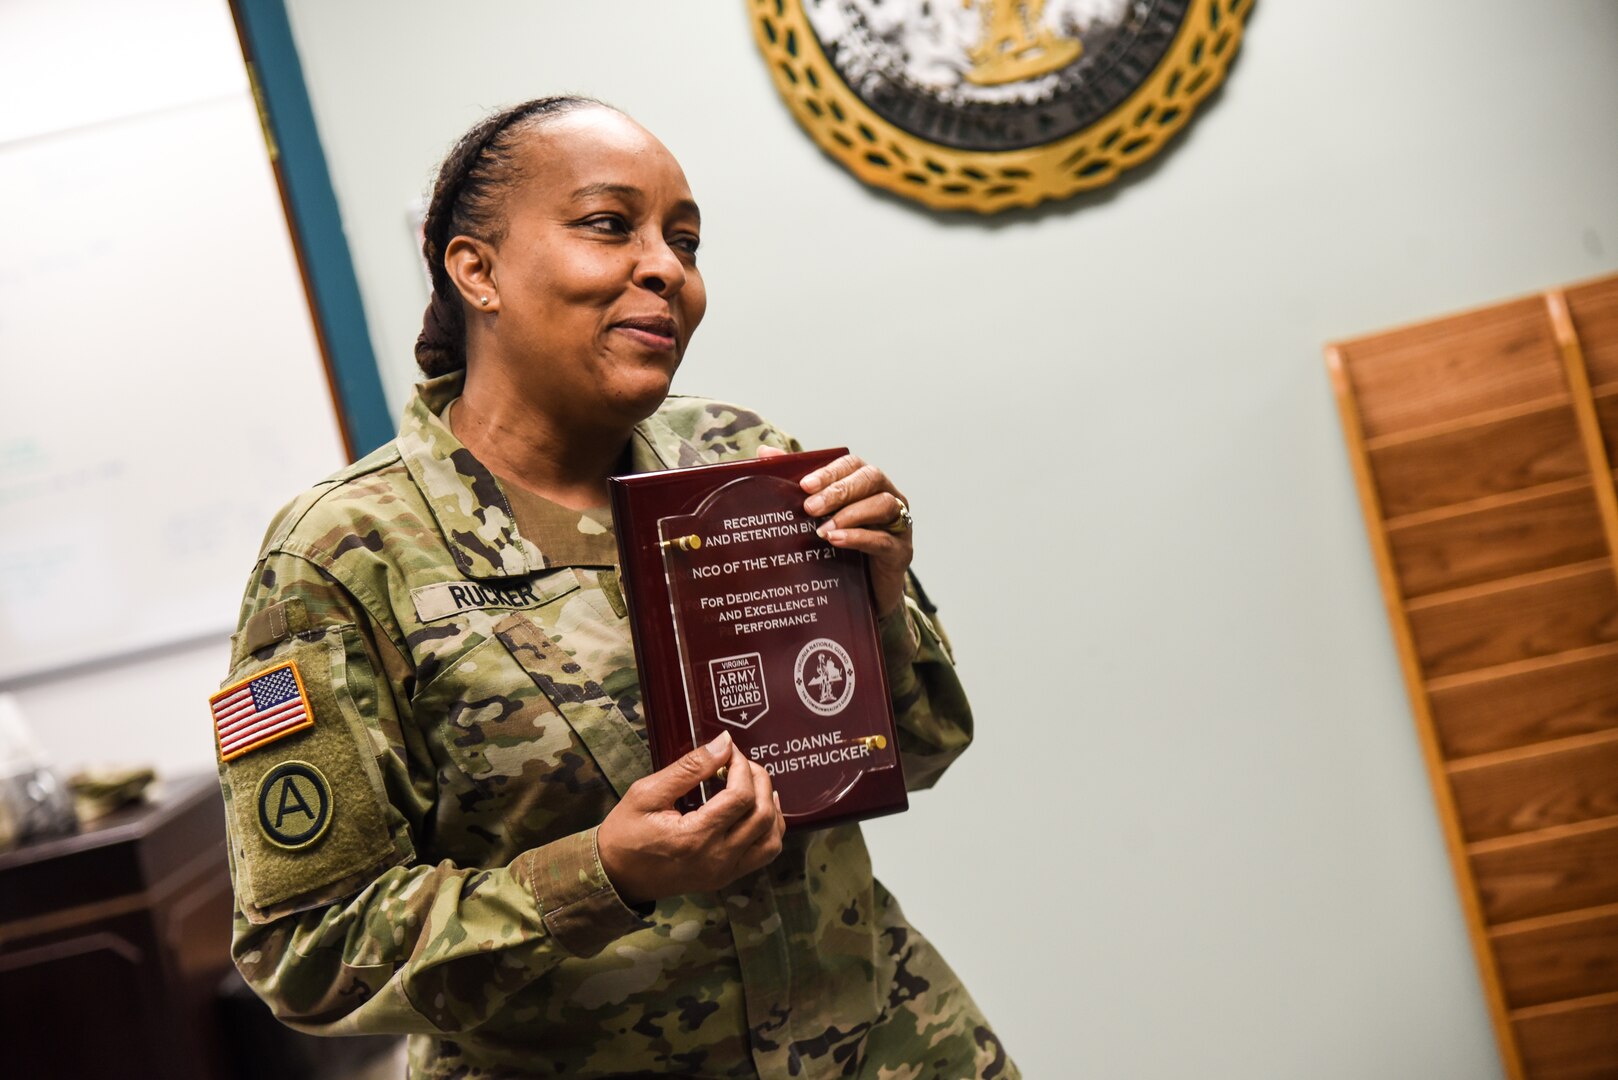 The Virginia Army National Guard’s Recruiting and Retention Battalion recognizes Sgt. 1st Class Jo-Ann Lindquist-Rucker as the battalion’s Noncommissioned Officer of the Year for 2021 during a small ceremony held March 15, 2022, at Fort Pickett, Virginia. Lindquist-Rucker serves as the battalion’s senior supply sergeant. (U.S. Army National Guard photo Sgt. 1st Class Terra C. Gatti)